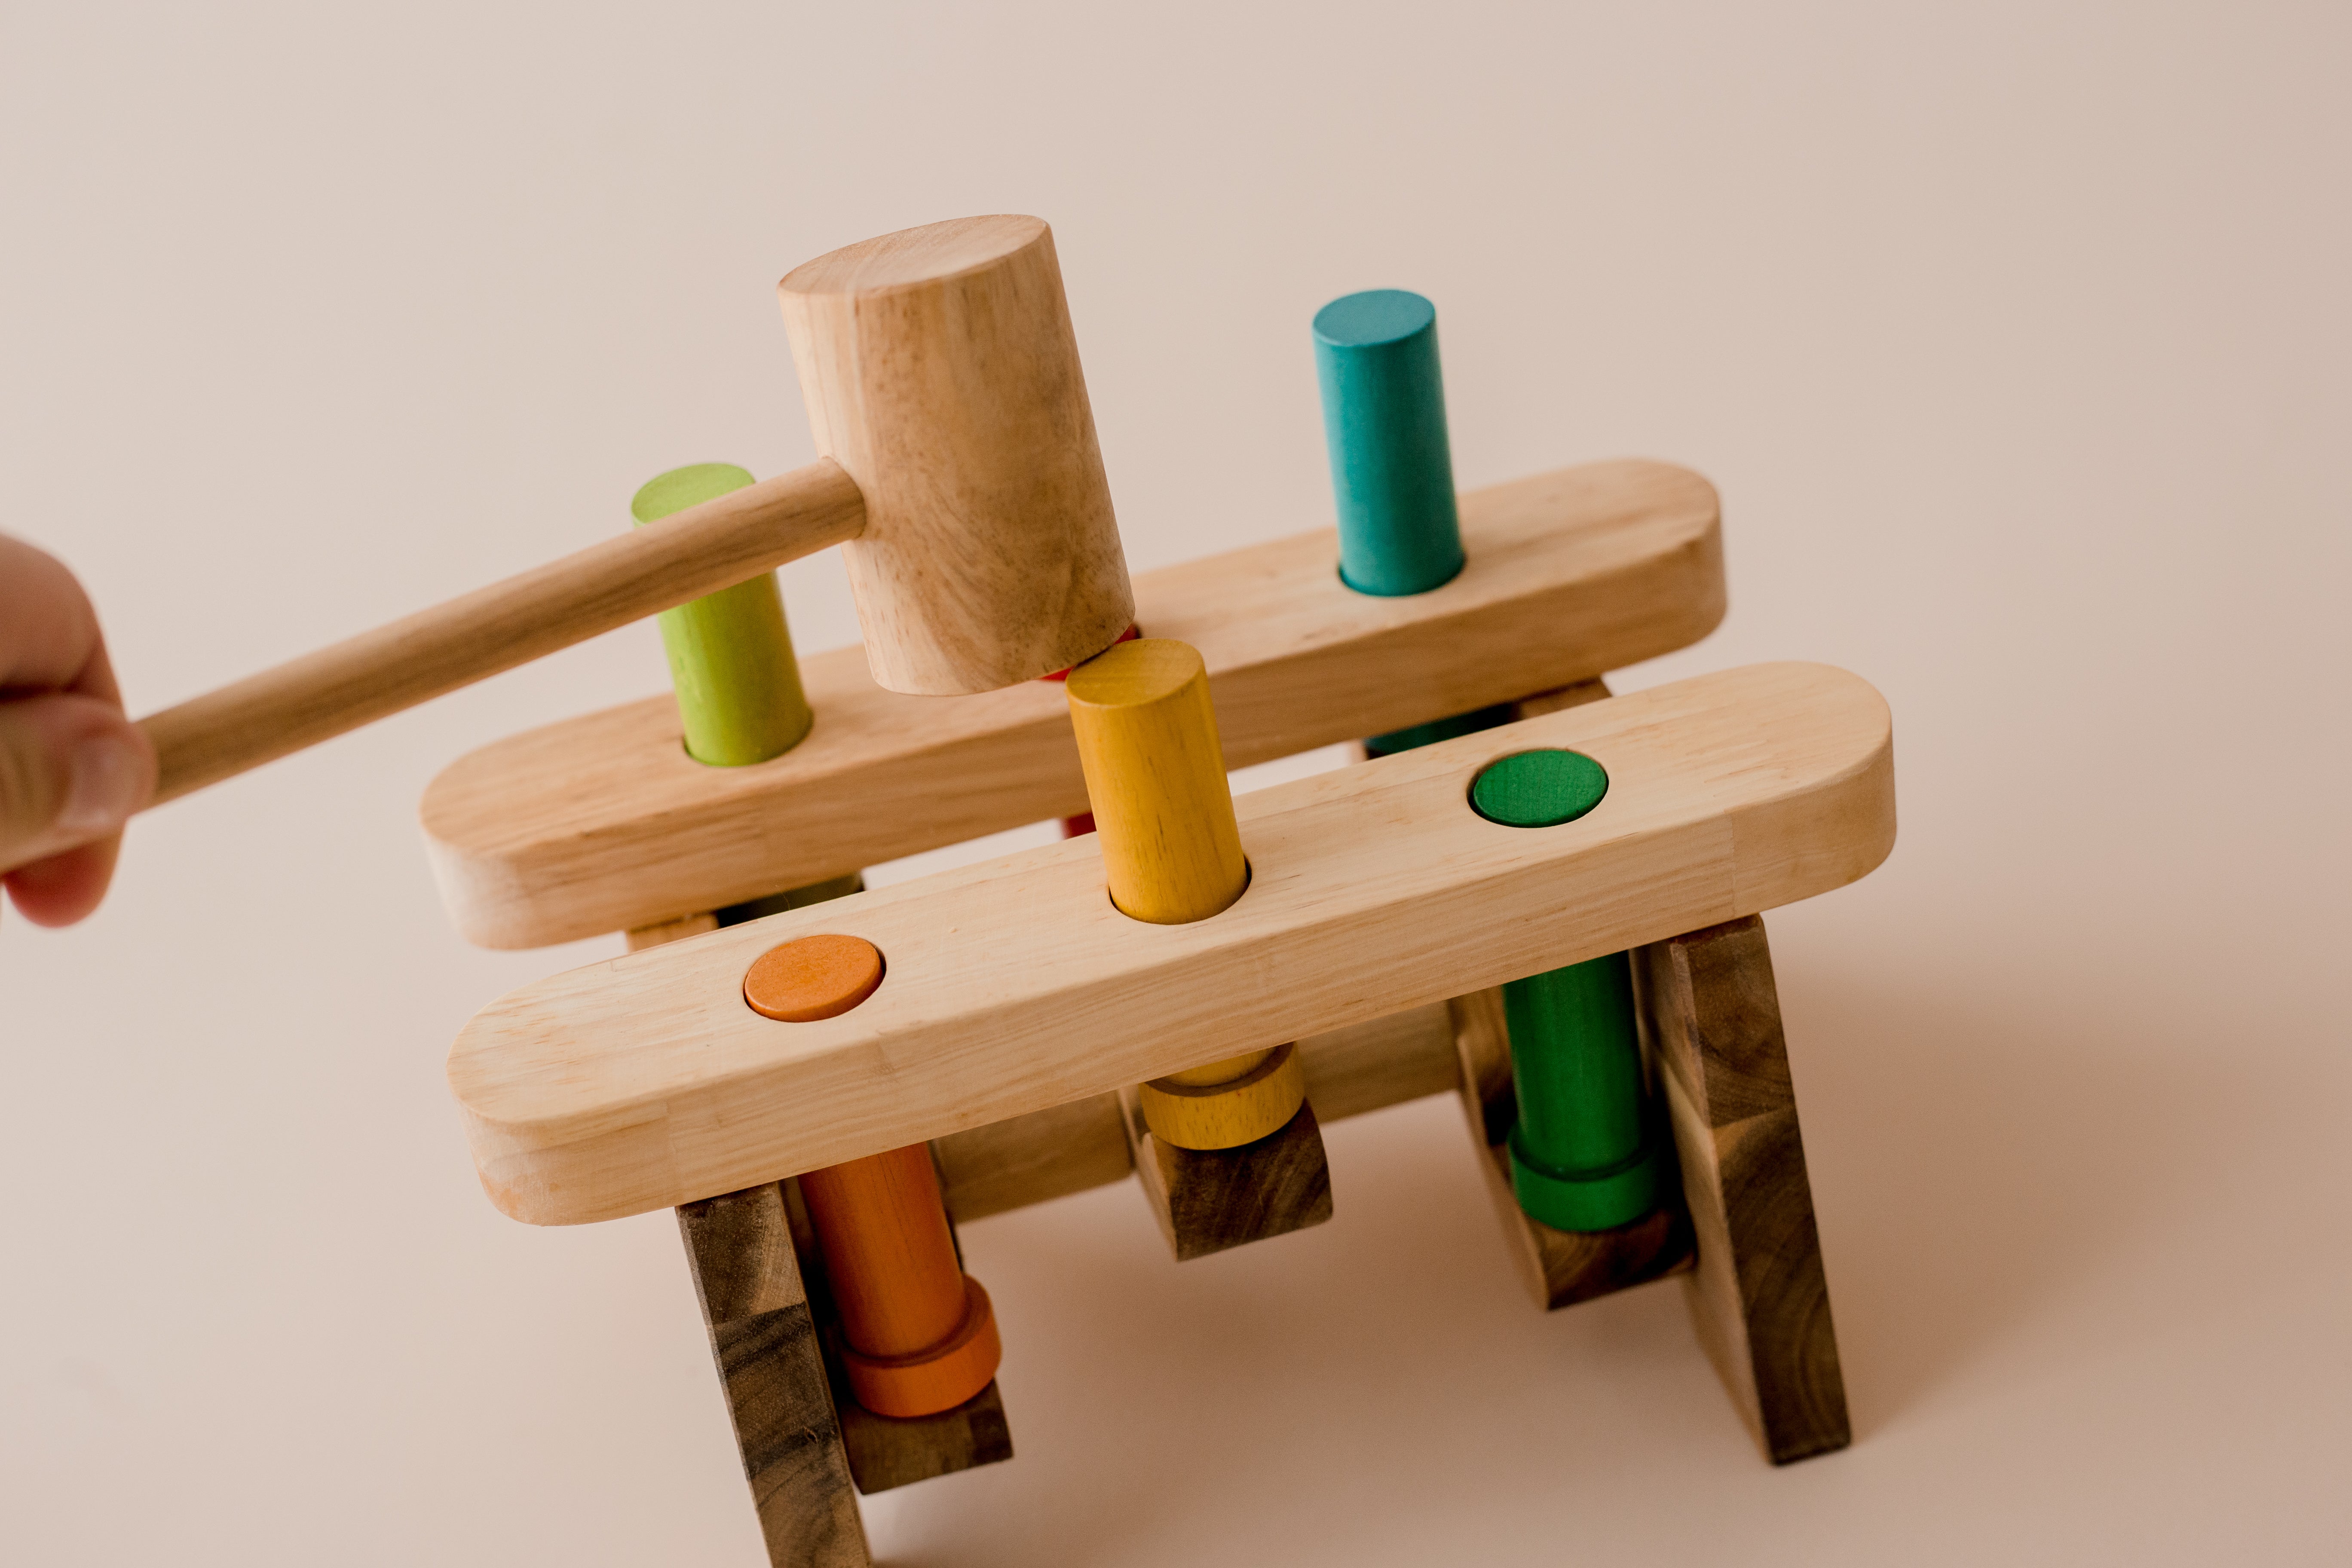 Shows a hand using the hammer to pound the pegs of the wooden pound a peg toy from QToys. Perfect for toddlers